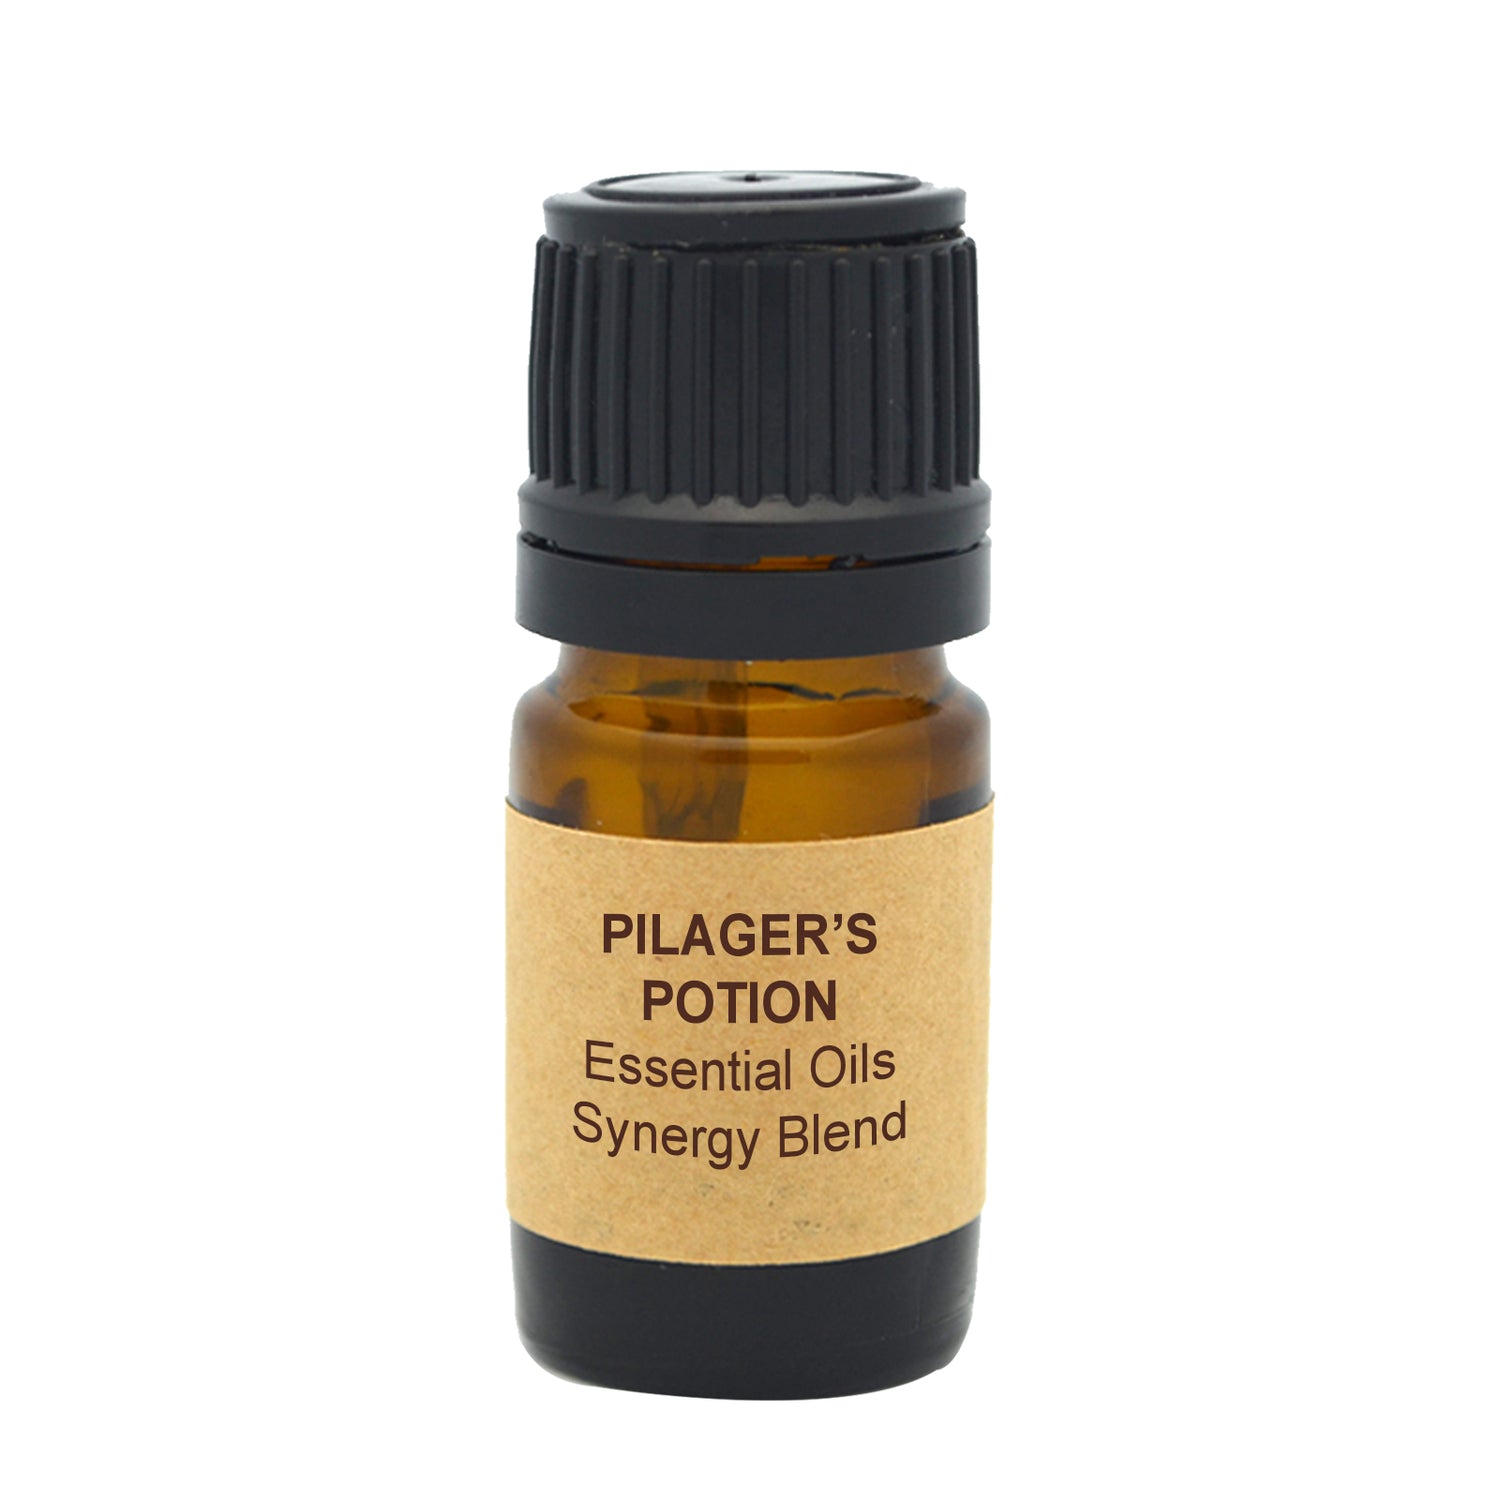 Pillager's Potion Essential Oils Synergy Blend.